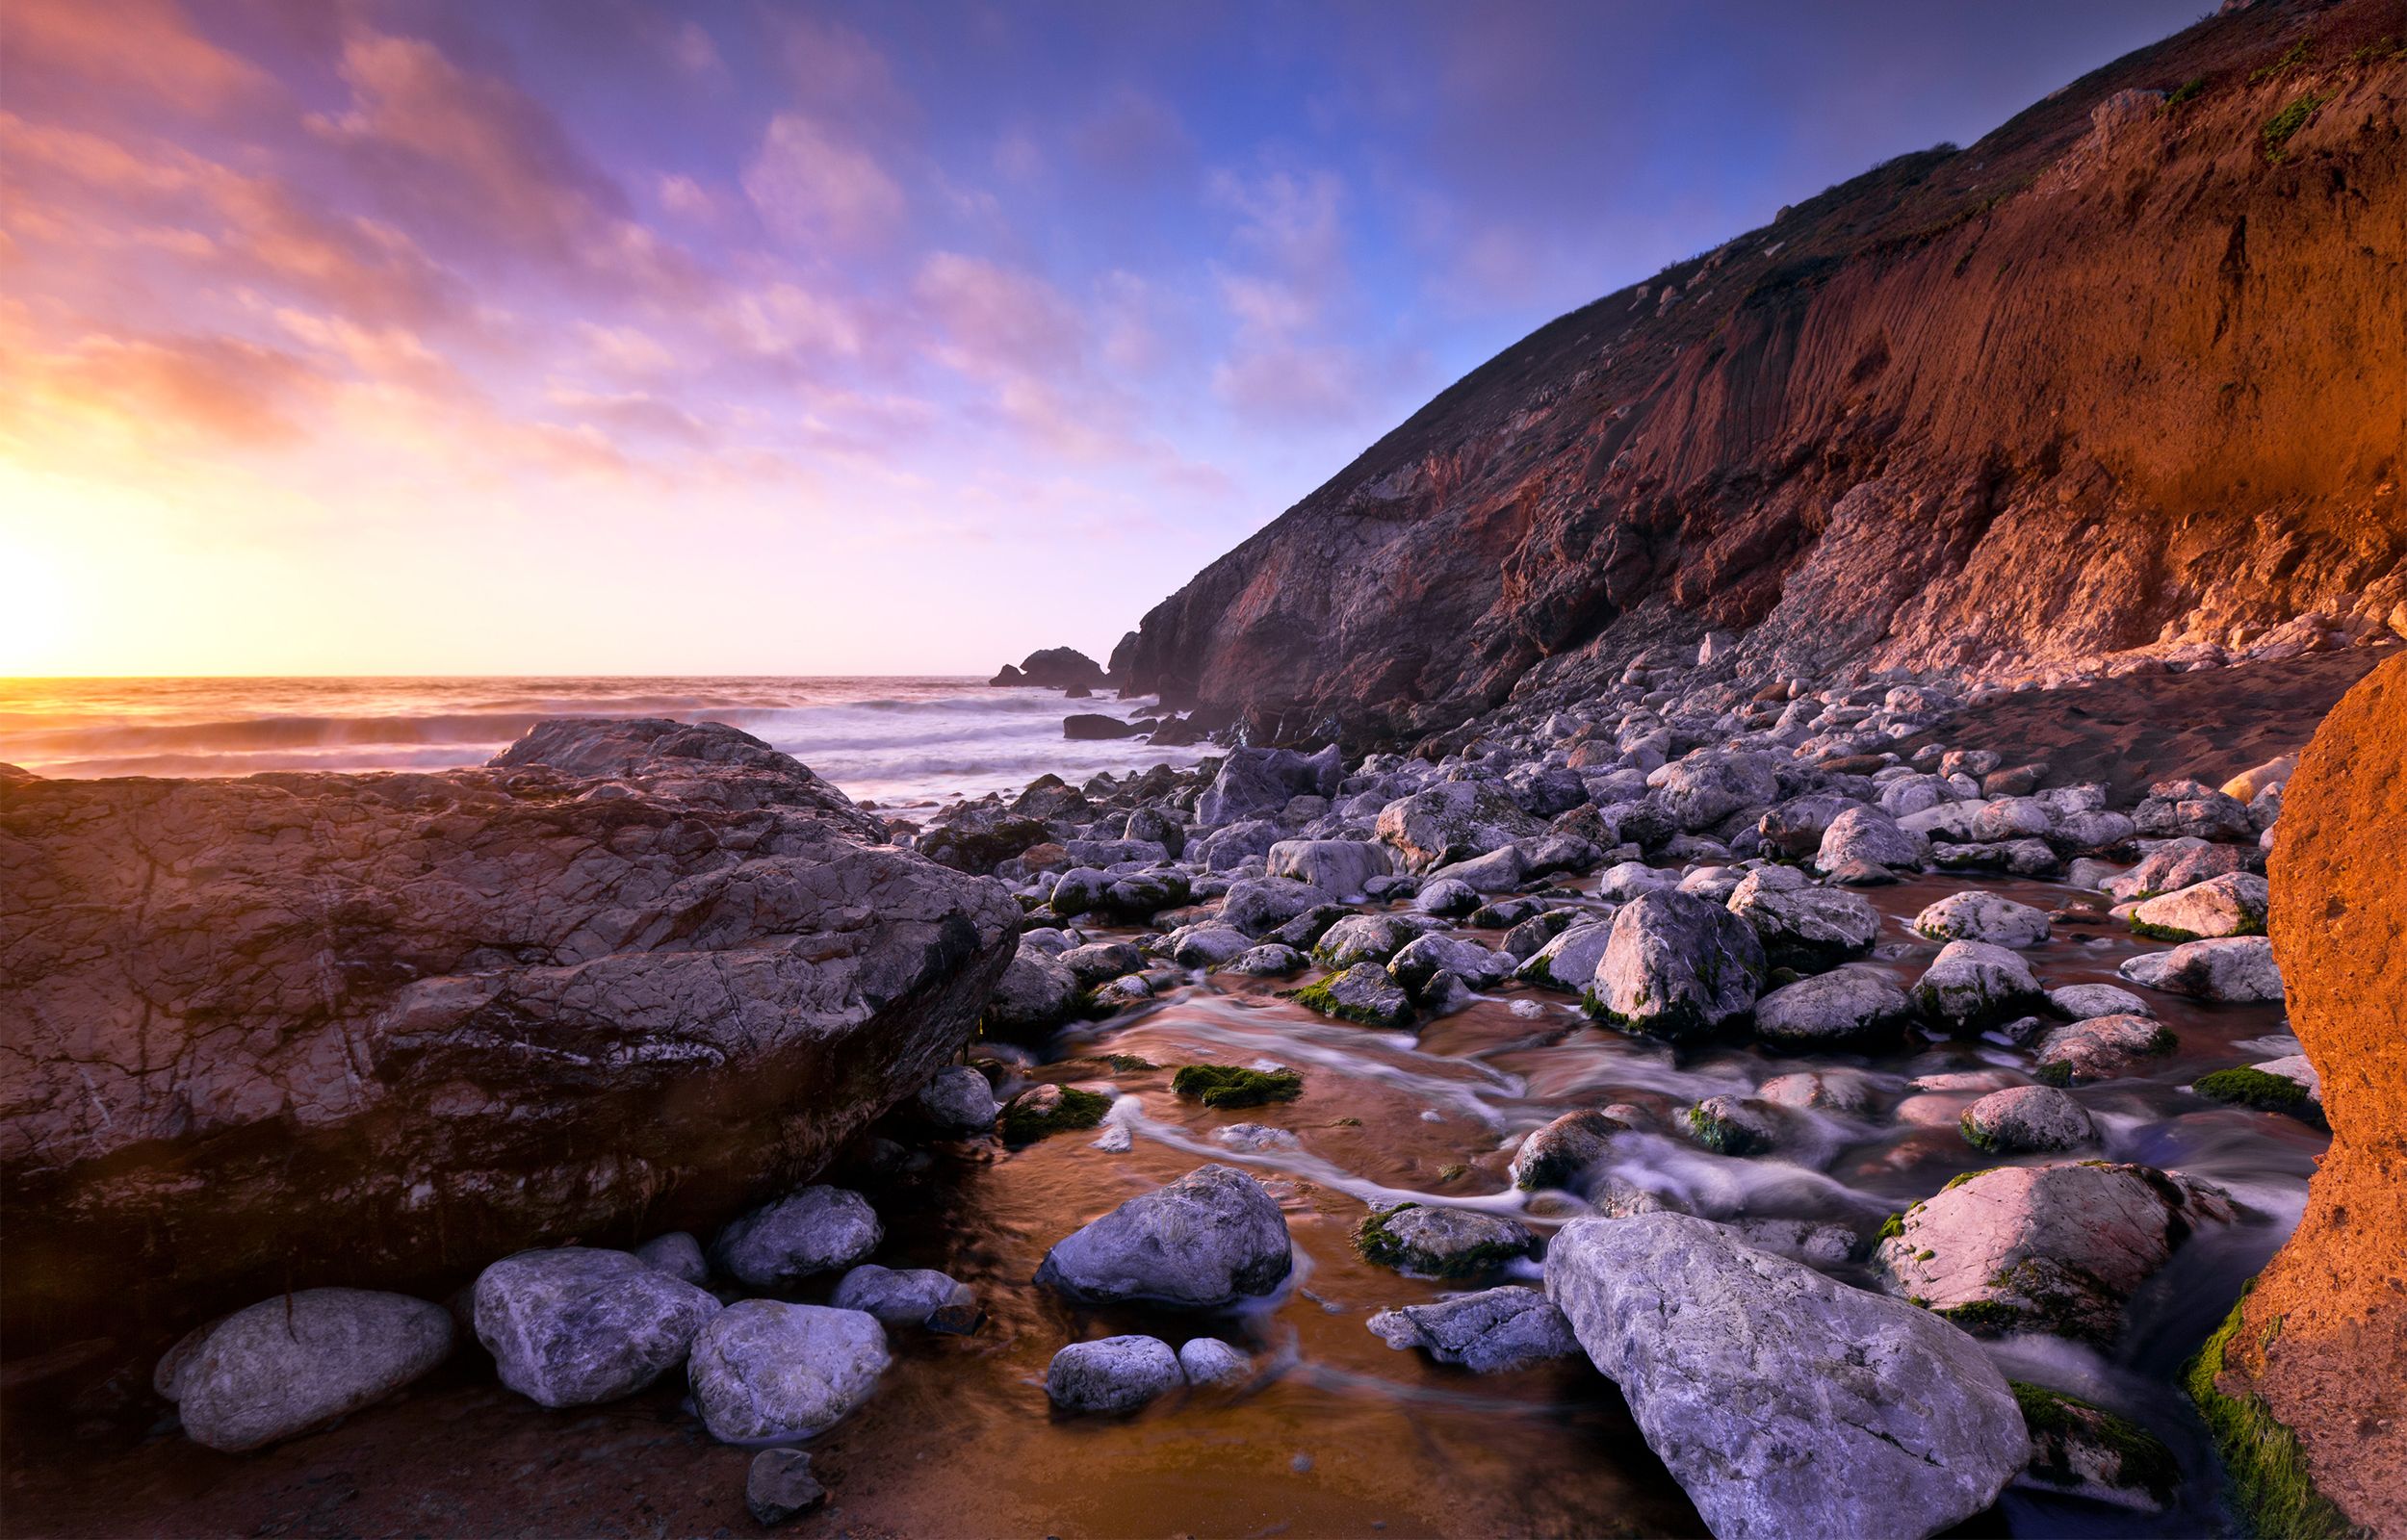 Daily Wallpaper: Rocky Beach Sunset. I Like To Waste My Time